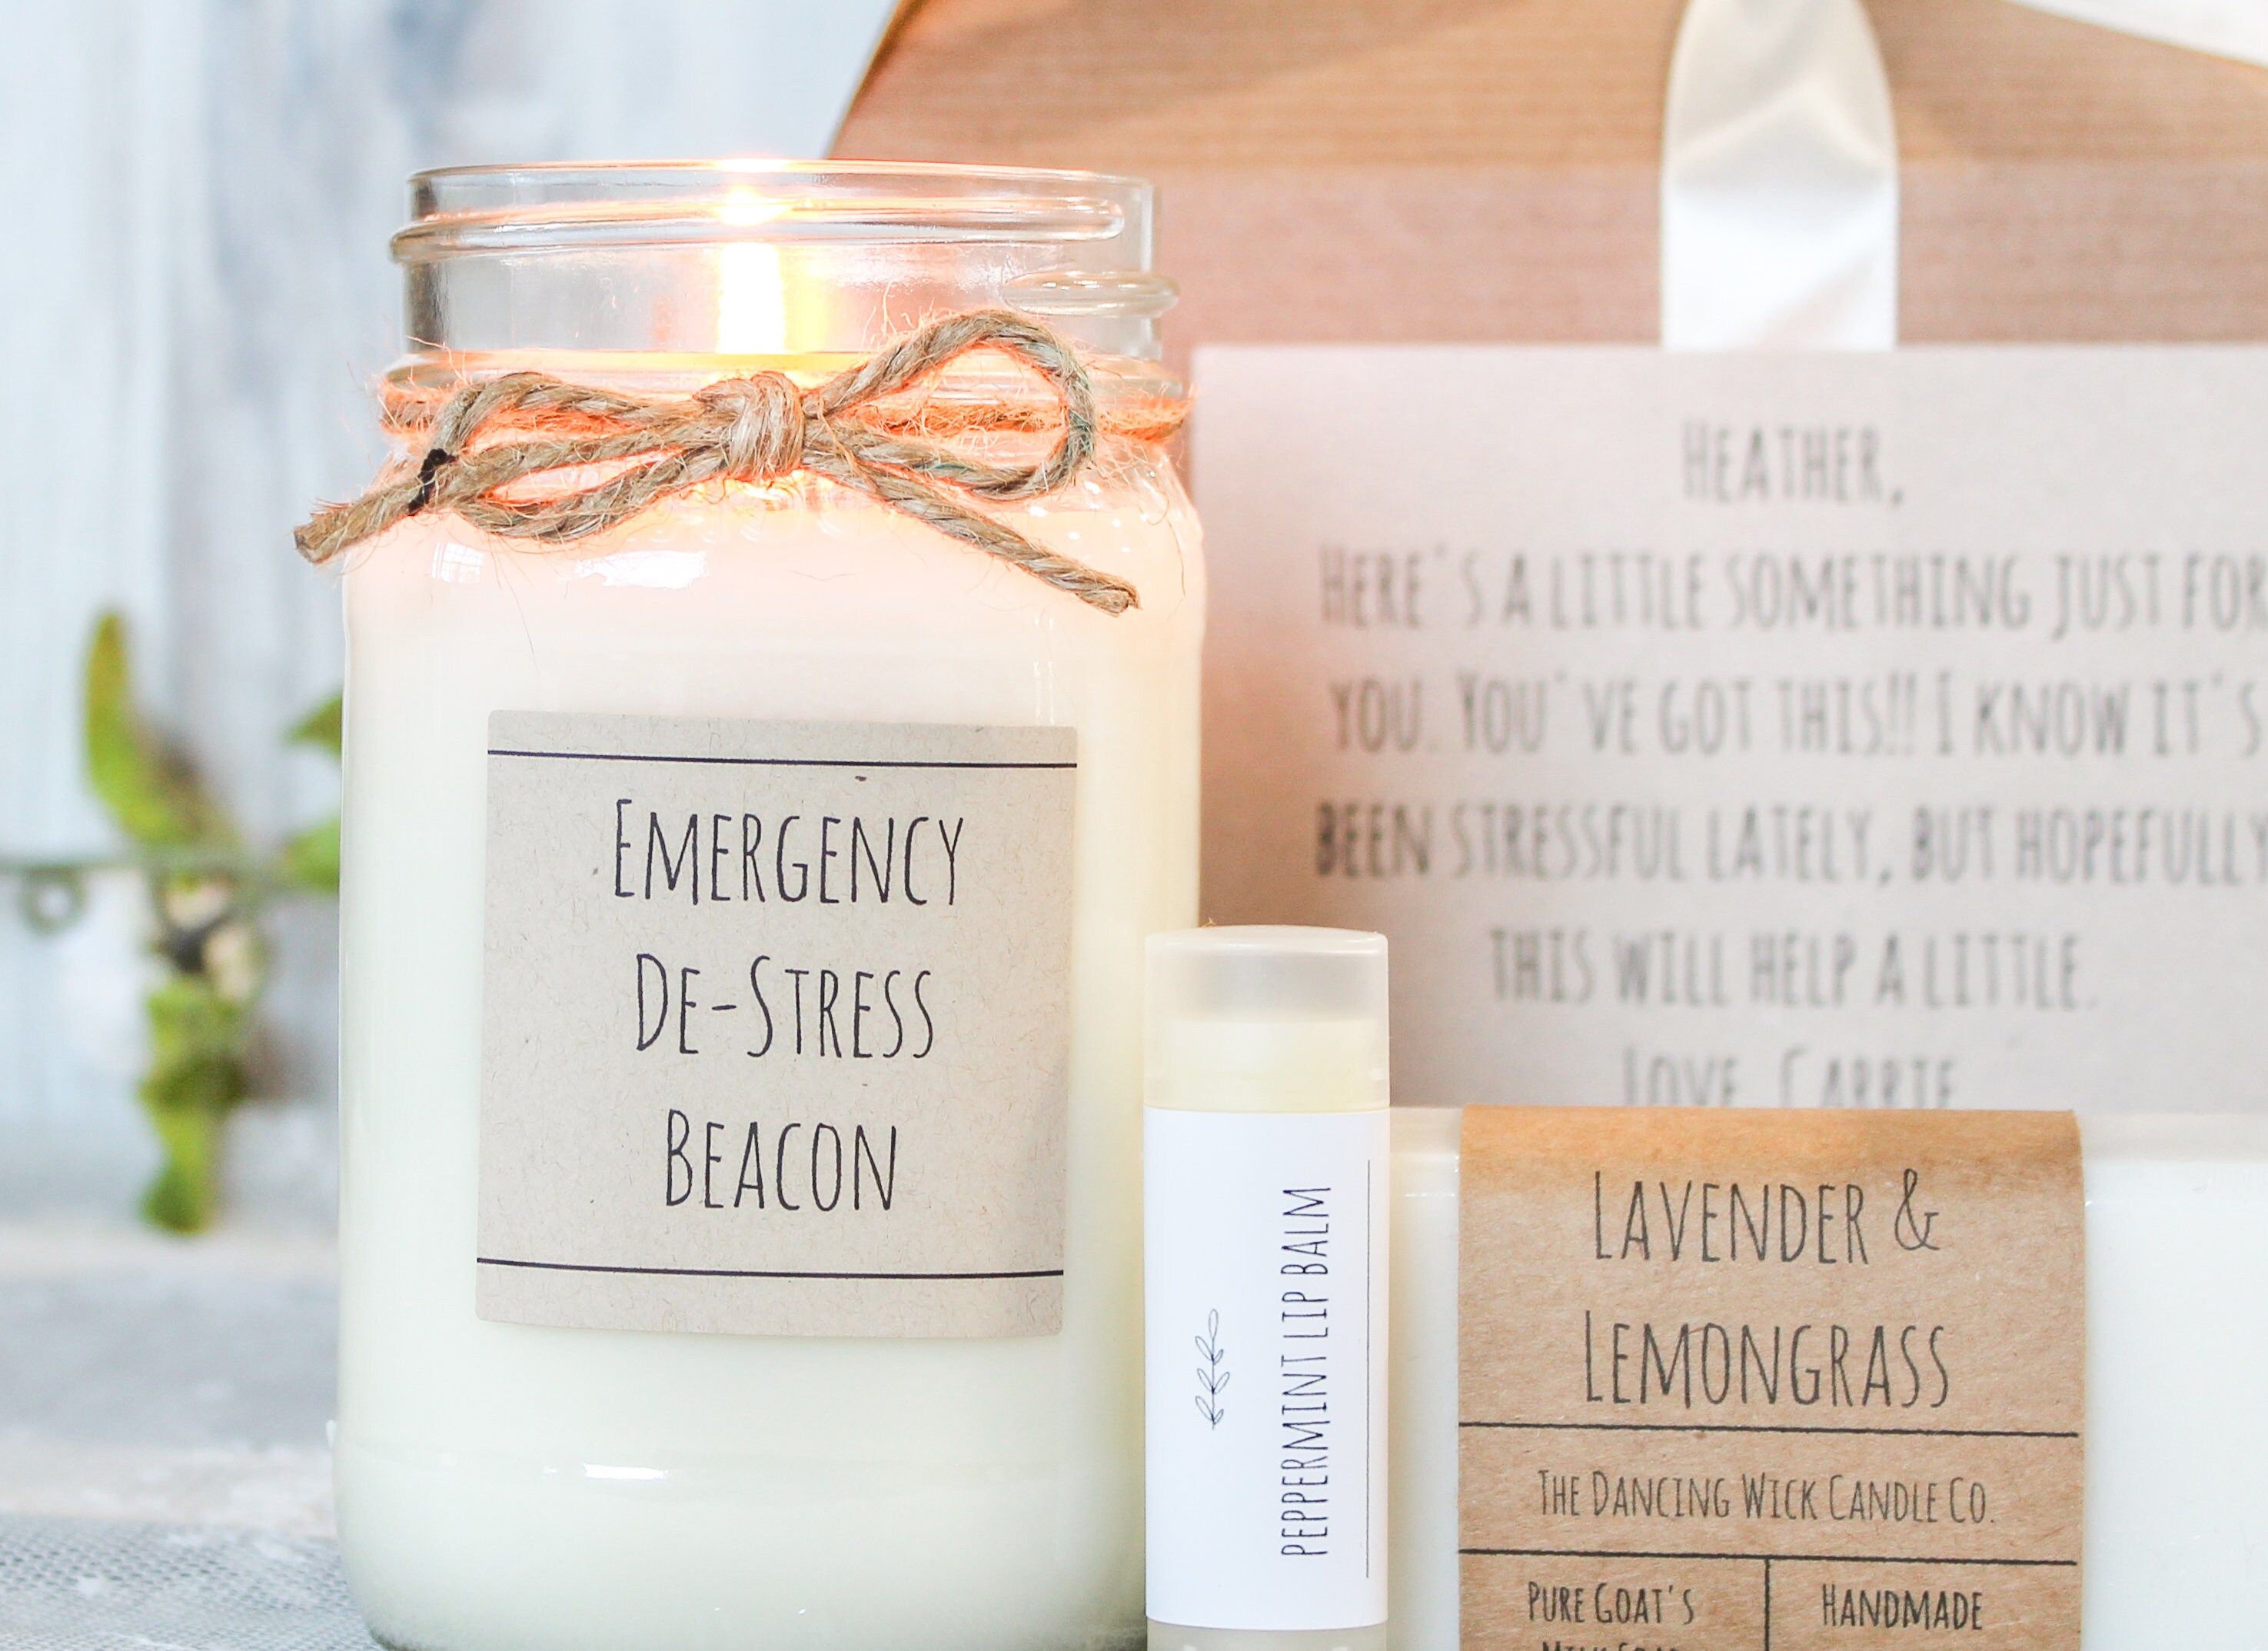 Know Someone Who Is Stressed? Best Stress Relief Gifts – SendAFriend